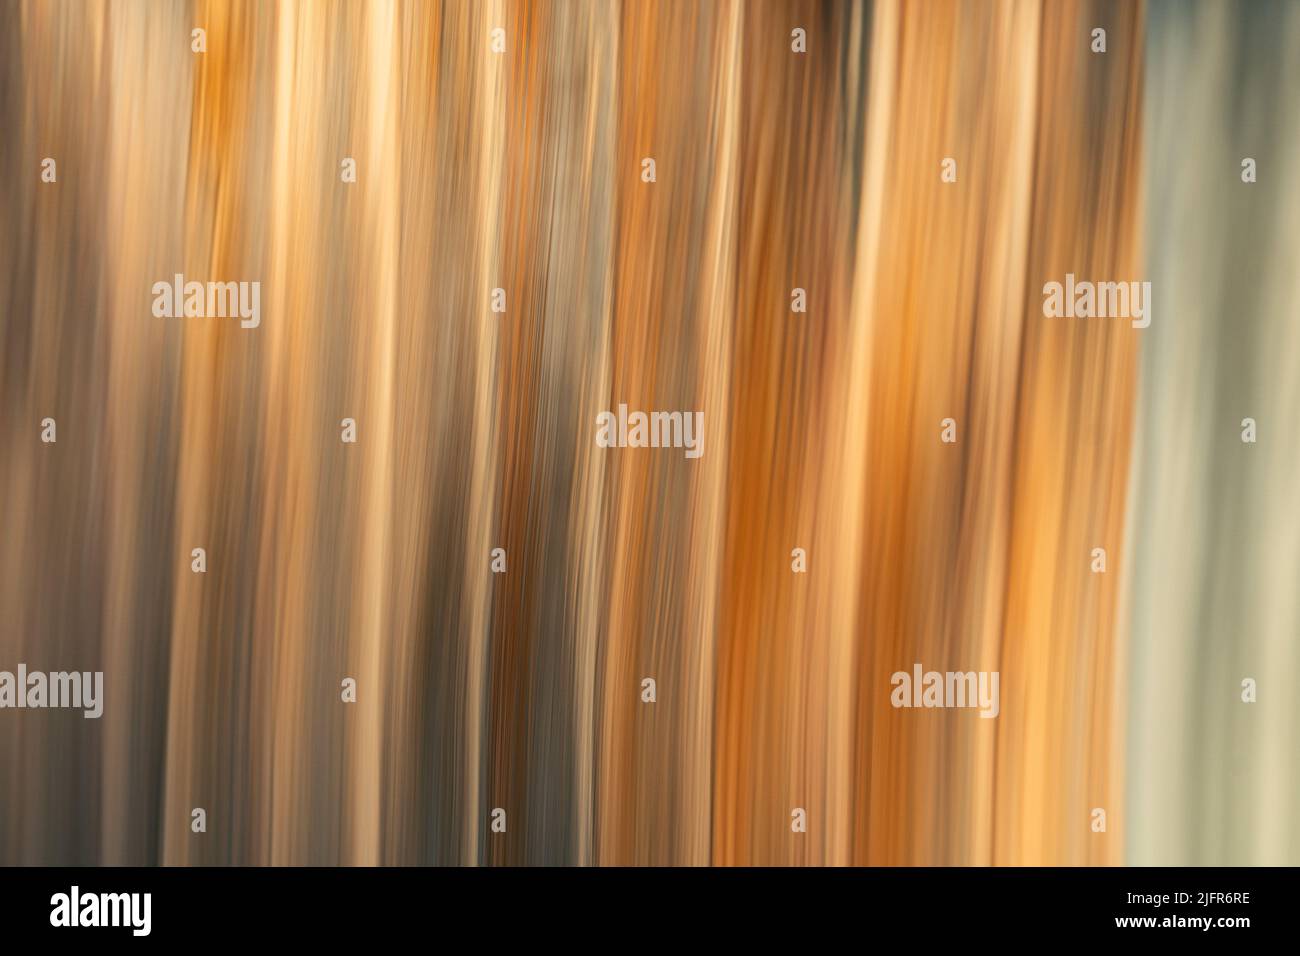 Abstract linear ICM (Intentional camera movement) image in golden earthy tones Stock Photo